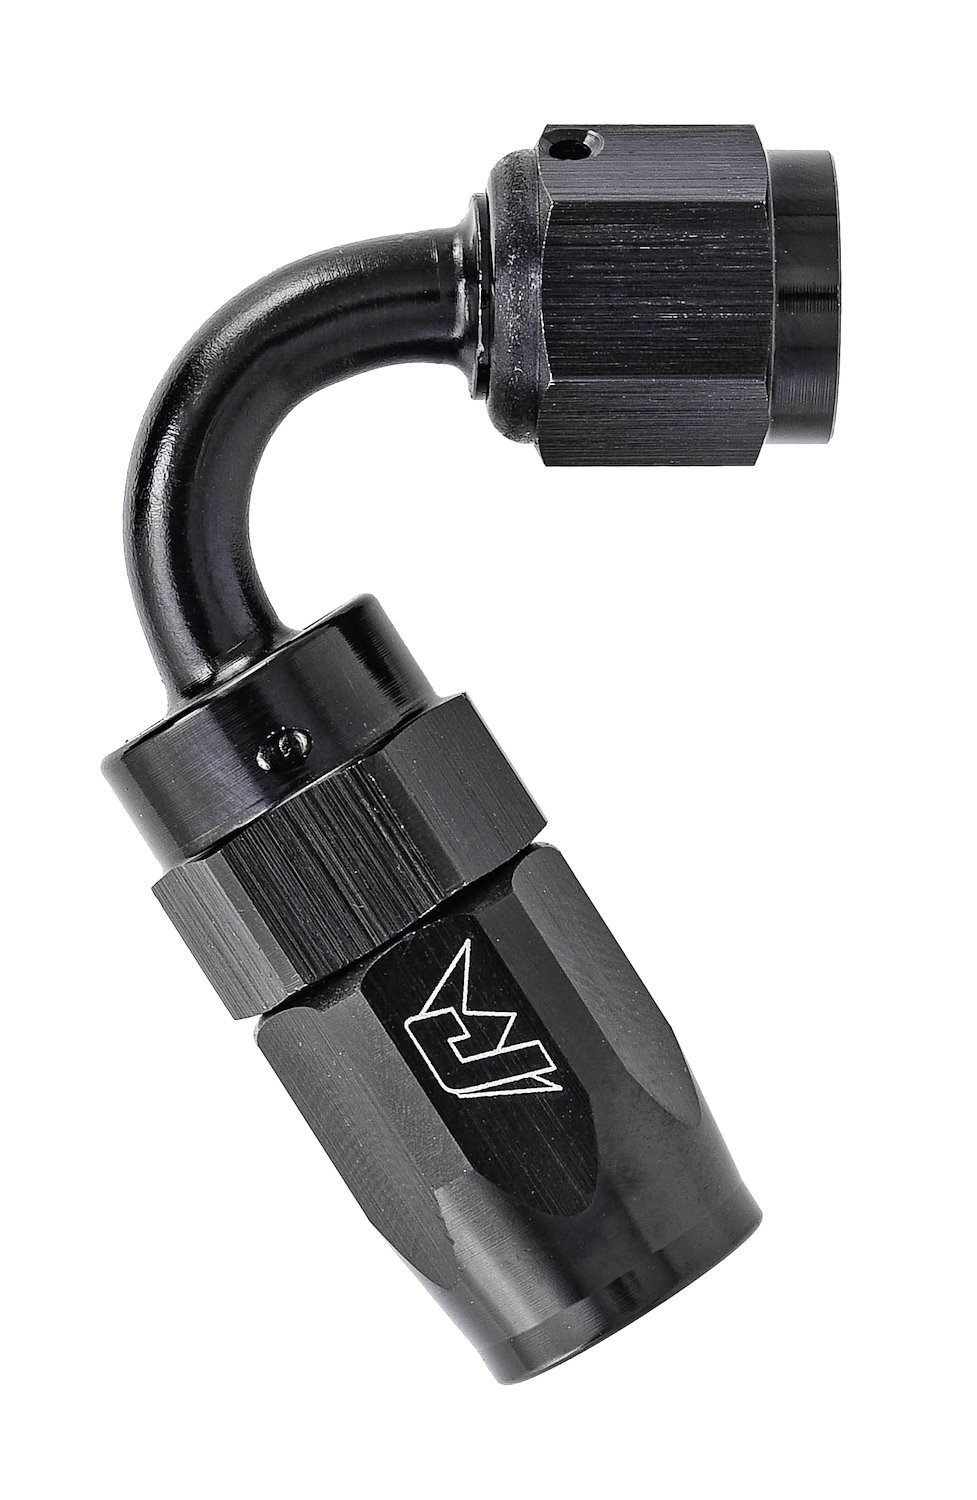 AN 120-Degree Max Flow Swivel Hose End [-4